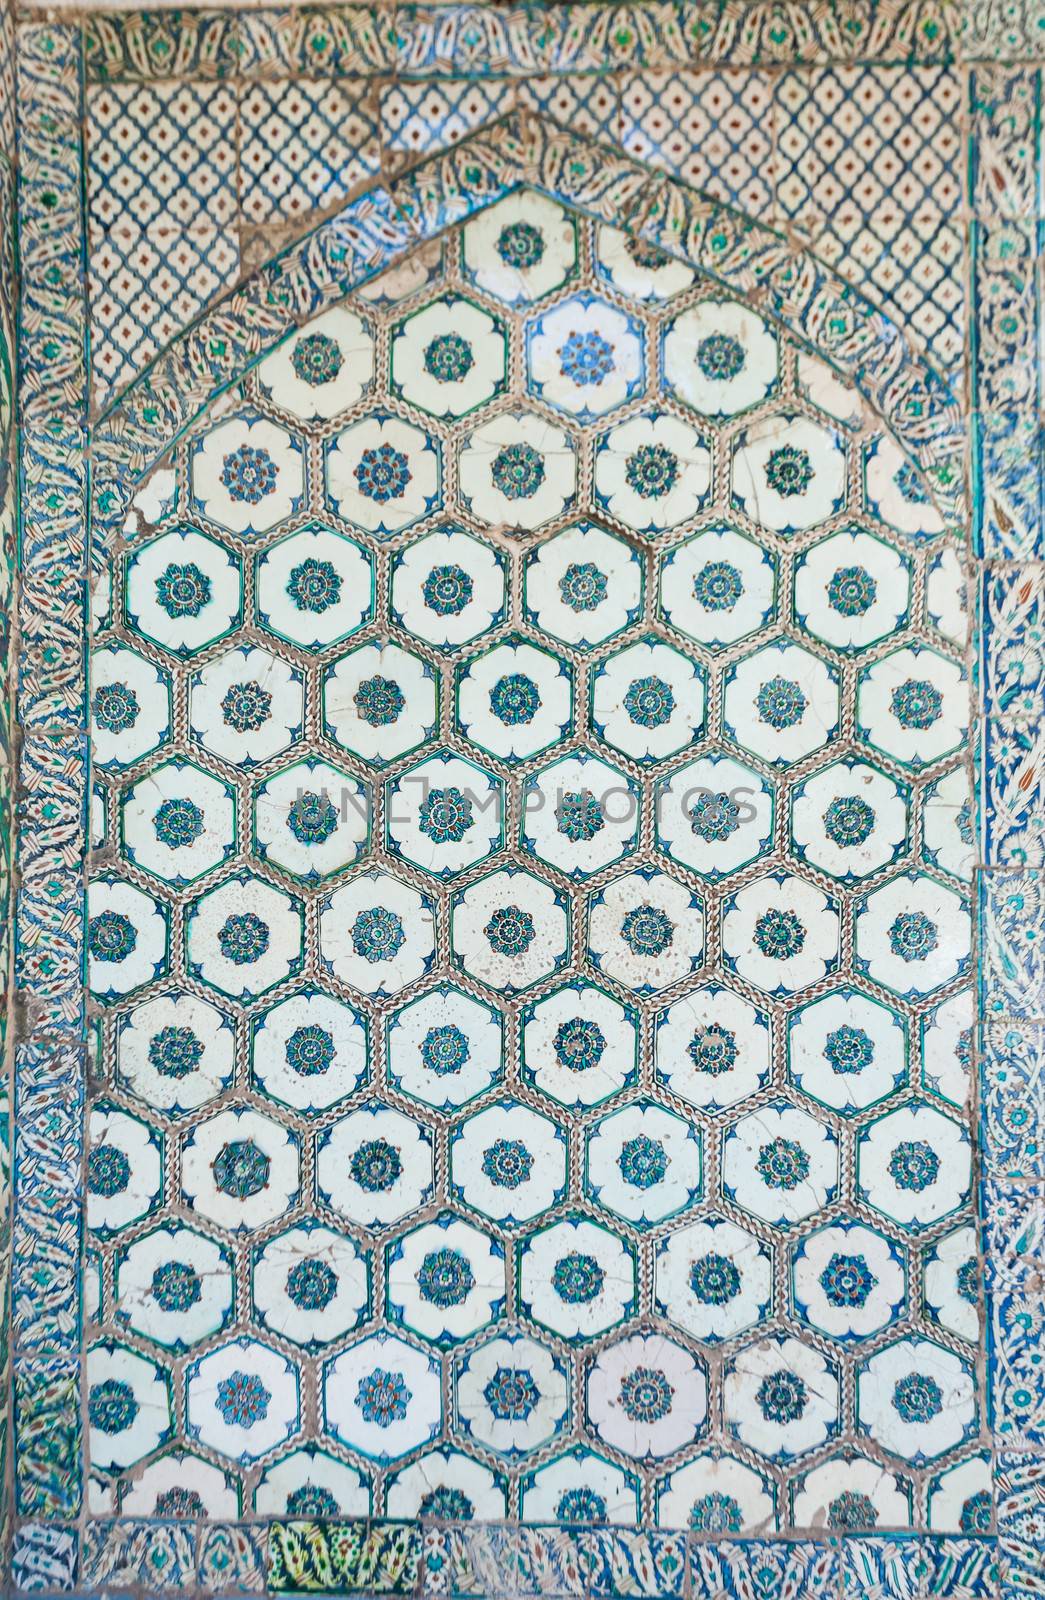 Turkish tile pattern from Topkapi Palace in IStanbul